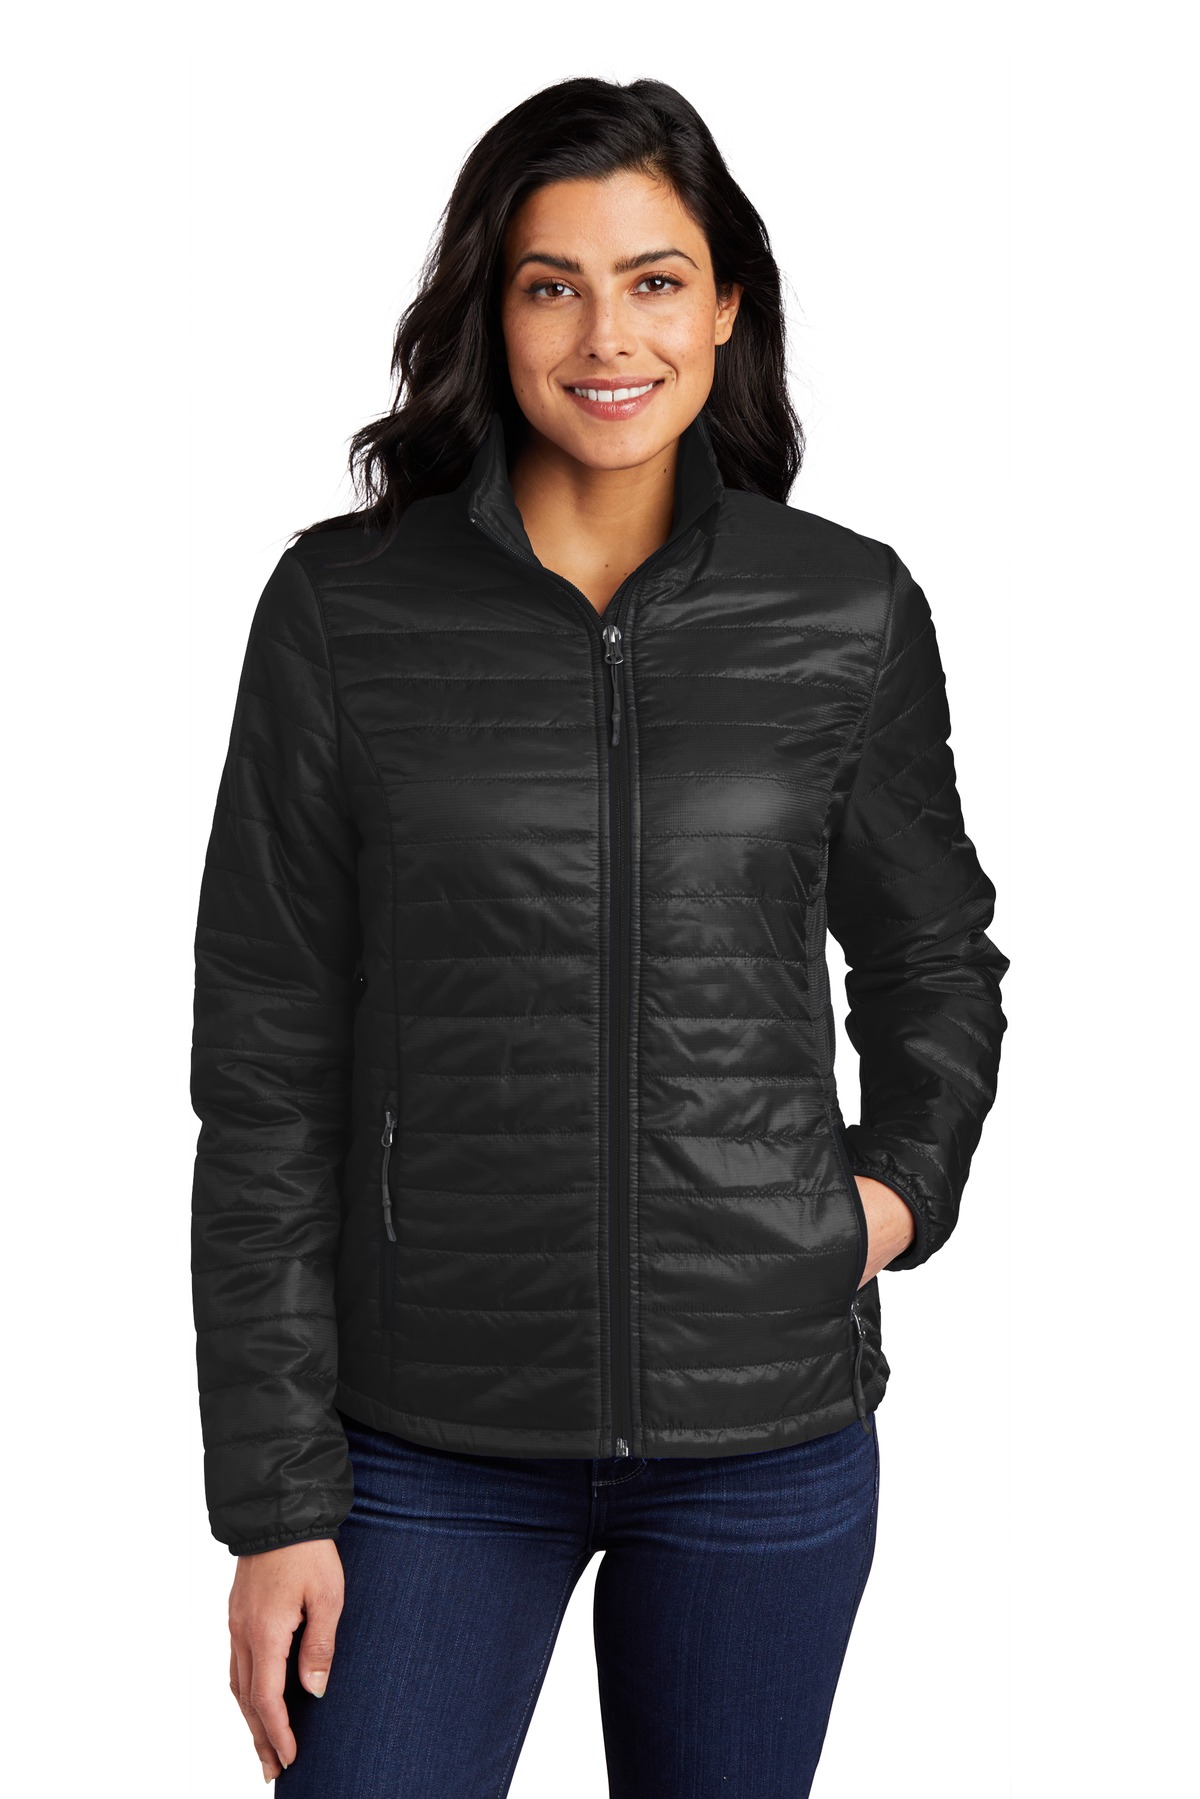 Port Authority Ladies Packable Puffy Jacket-Port Authority